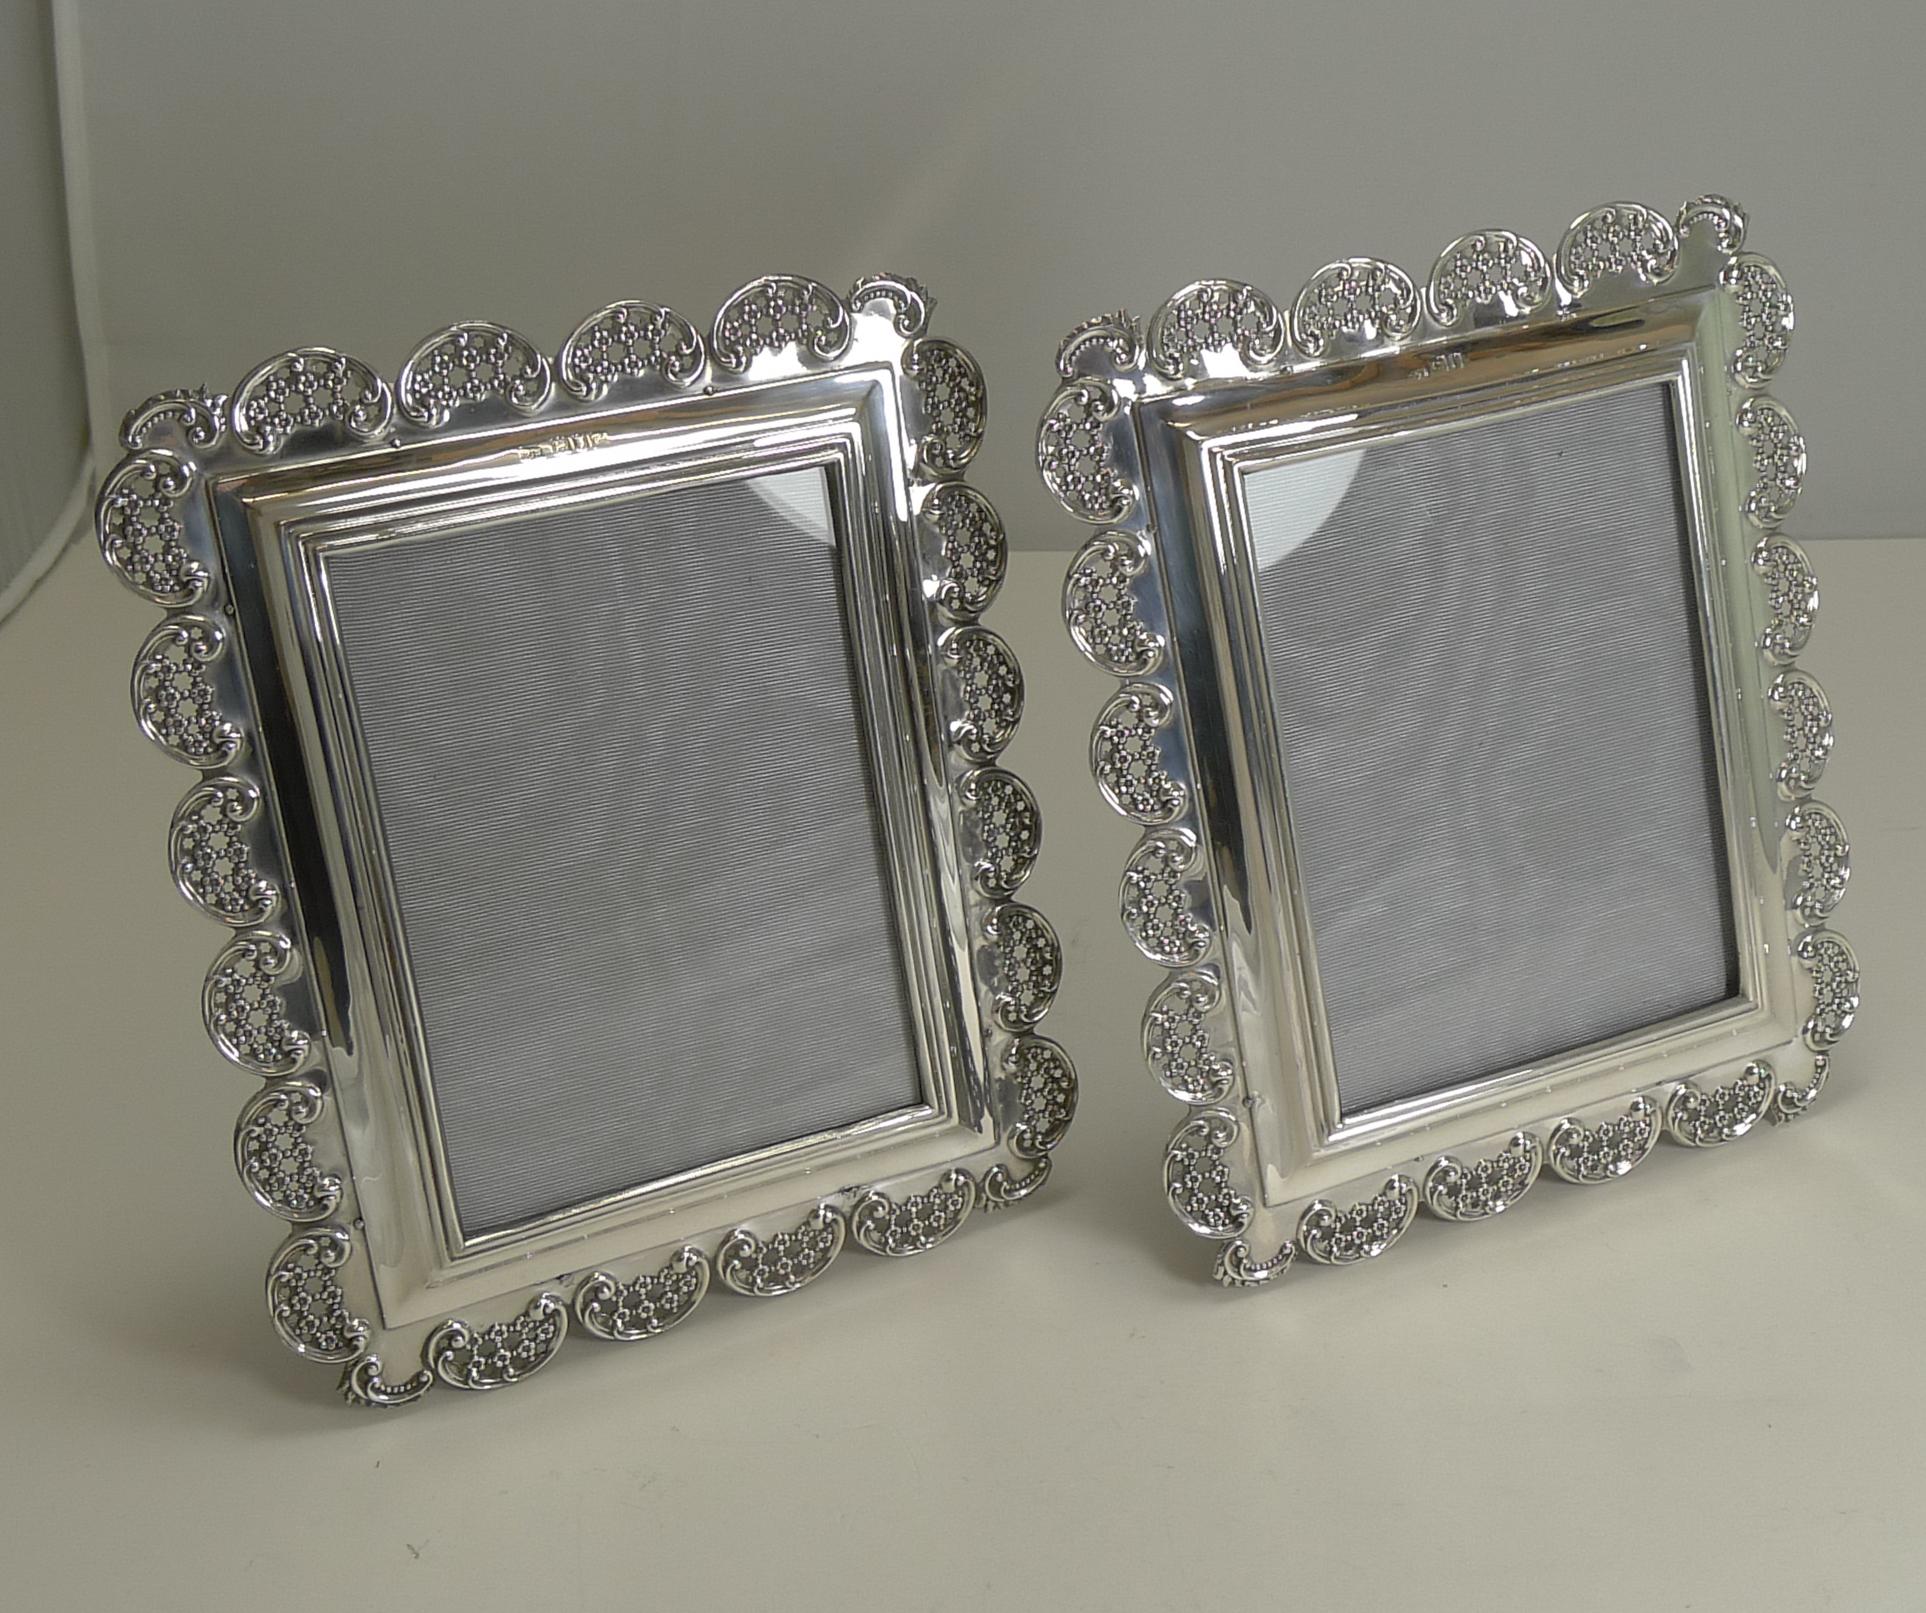 A stunning pair of late Victorian photograph frames, lovely quality with an intricate cast silver scalloped border created from a series of reticulated panels with tiny floral motifs within.

Each of the frames is fully hallmarked for London 1898